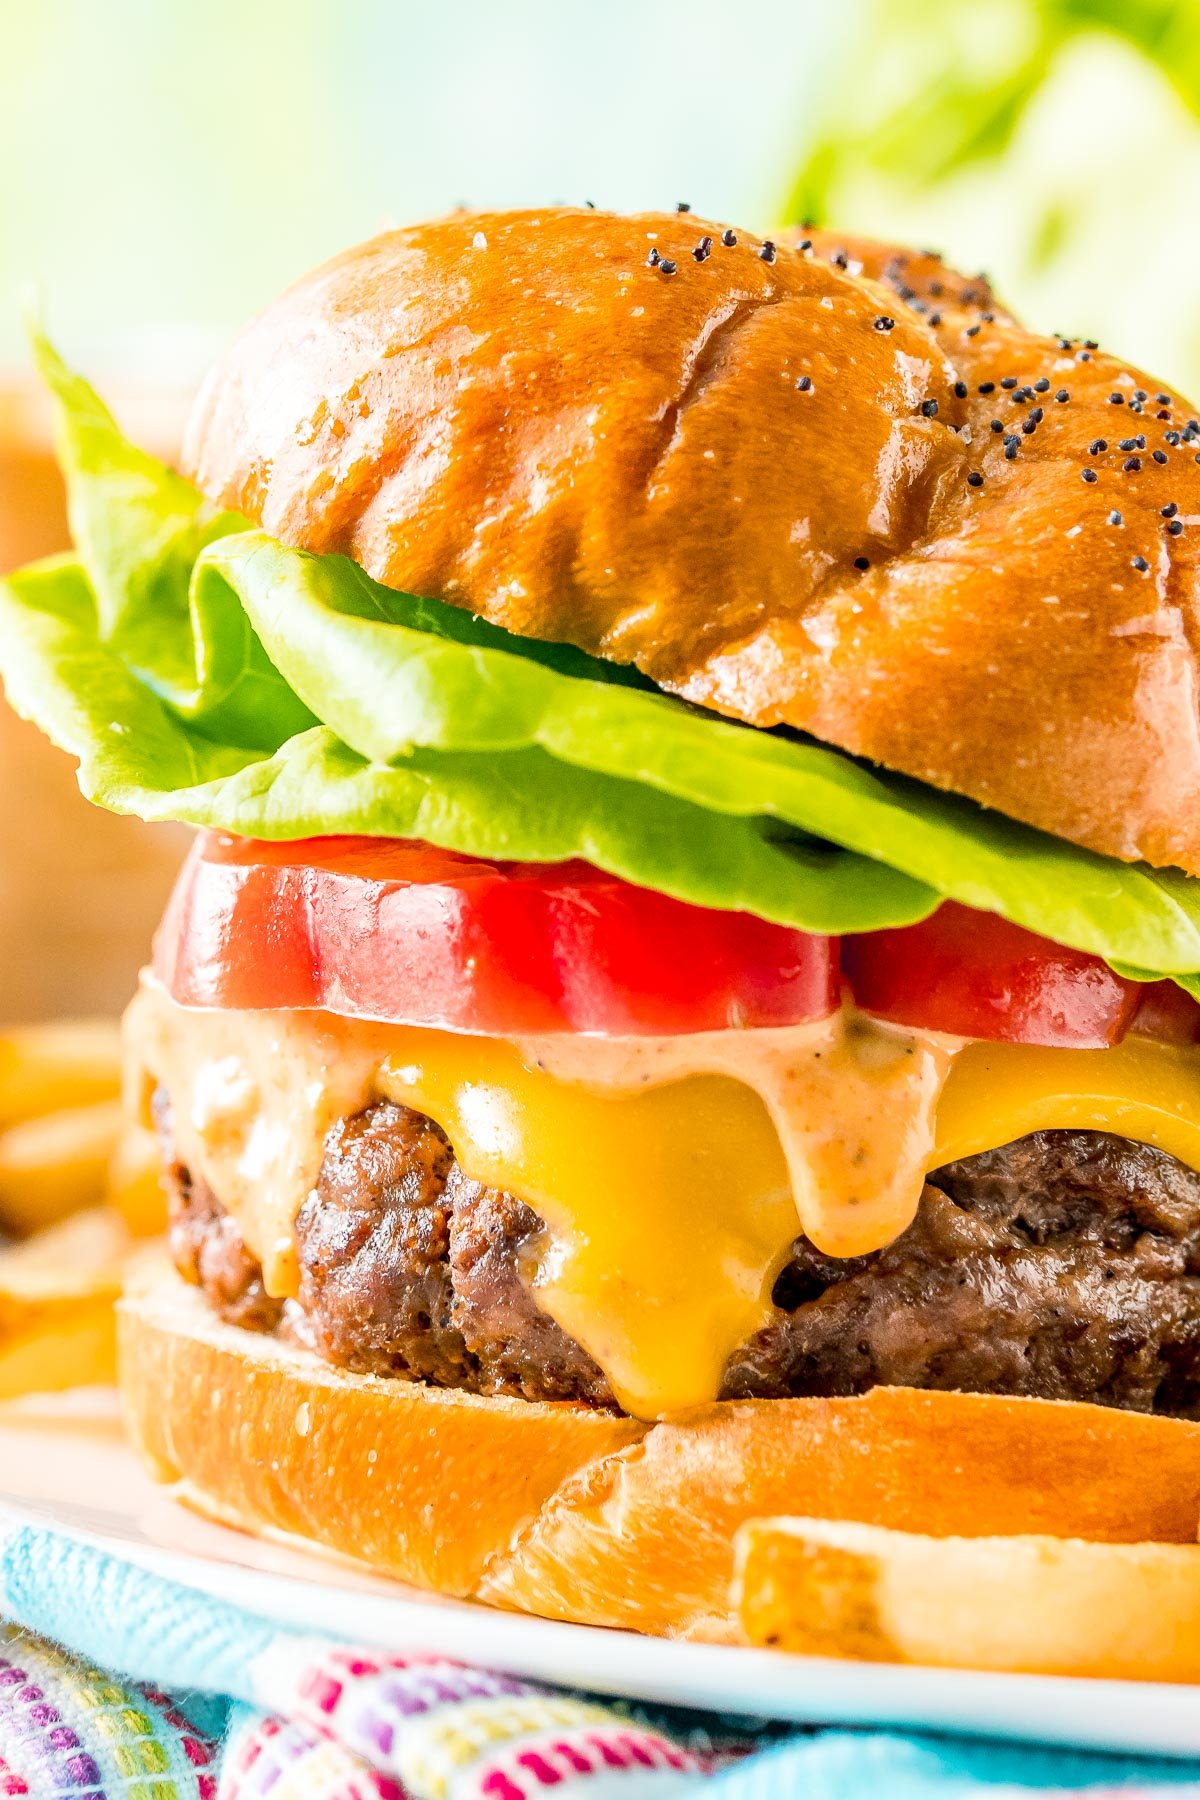 Close up photo of a juice burger topped with cheese, sauce, tomato, and lettuce.